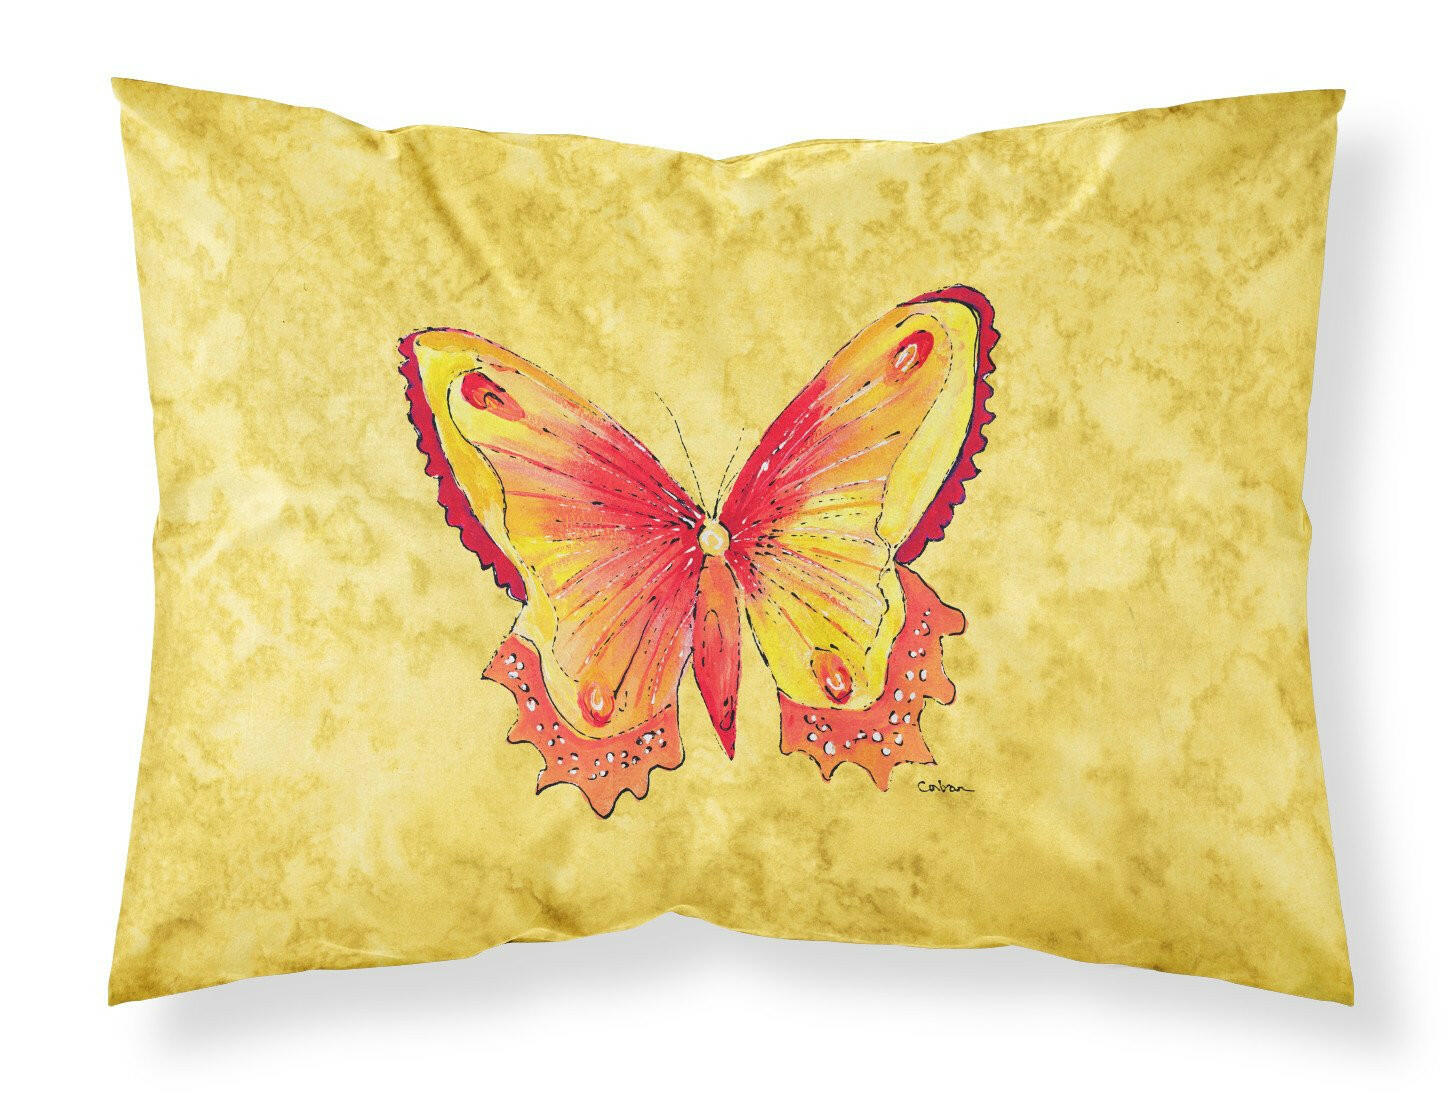 Butterfly on Yellow Moisture wicking Fabric standard pillowcase by Caroline's Treasures